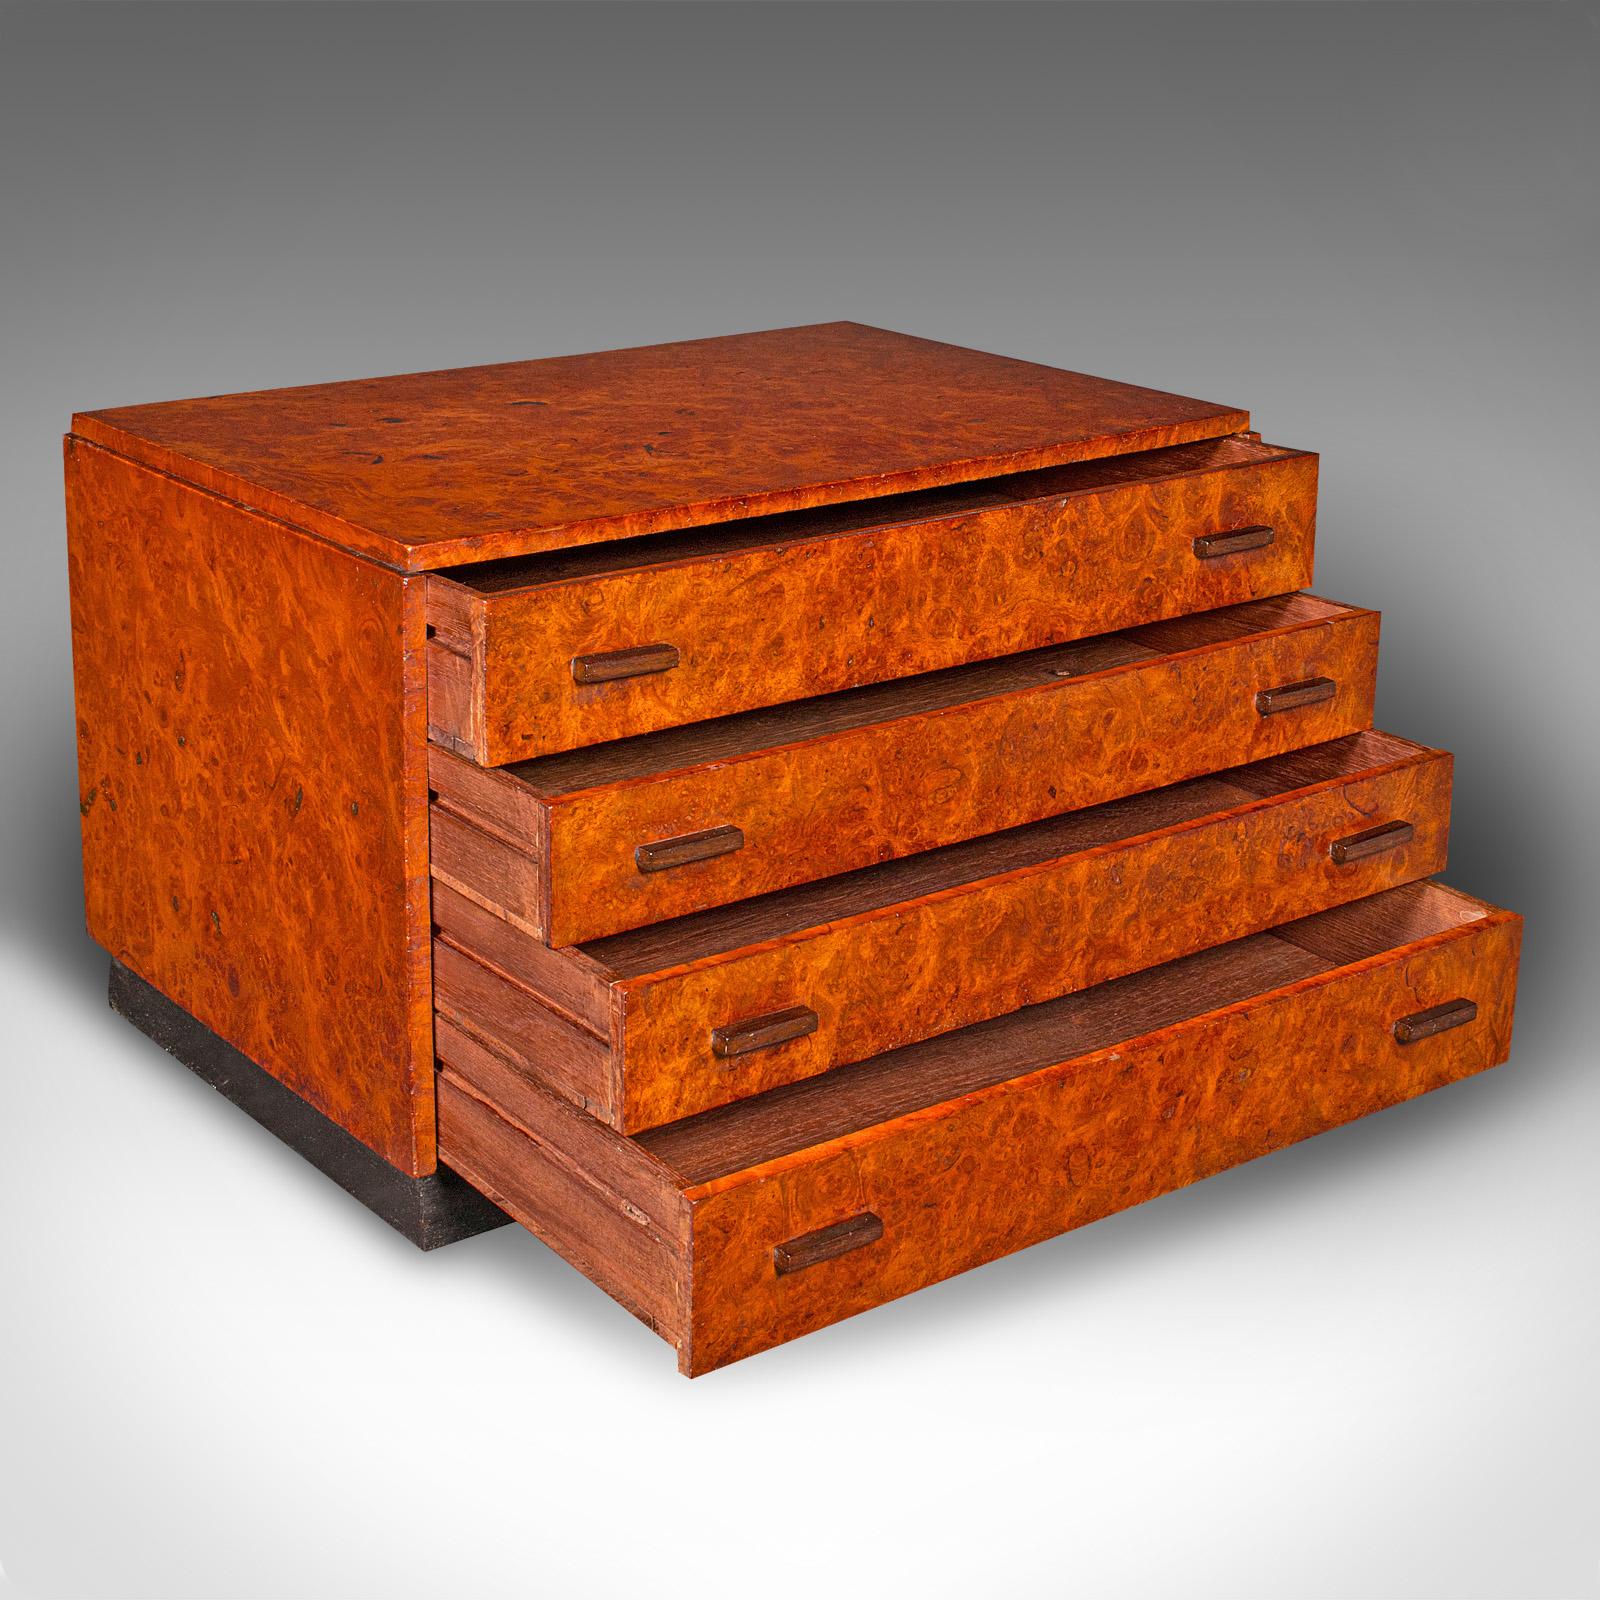 This is a vintage specimen collector's chest of drawers. A French, solid walnut four drawer executive desk box, dating to the Art Deco period, circa 1930.

Exceptional figuring and fine colour enhance this striking set of drawers
Displays a